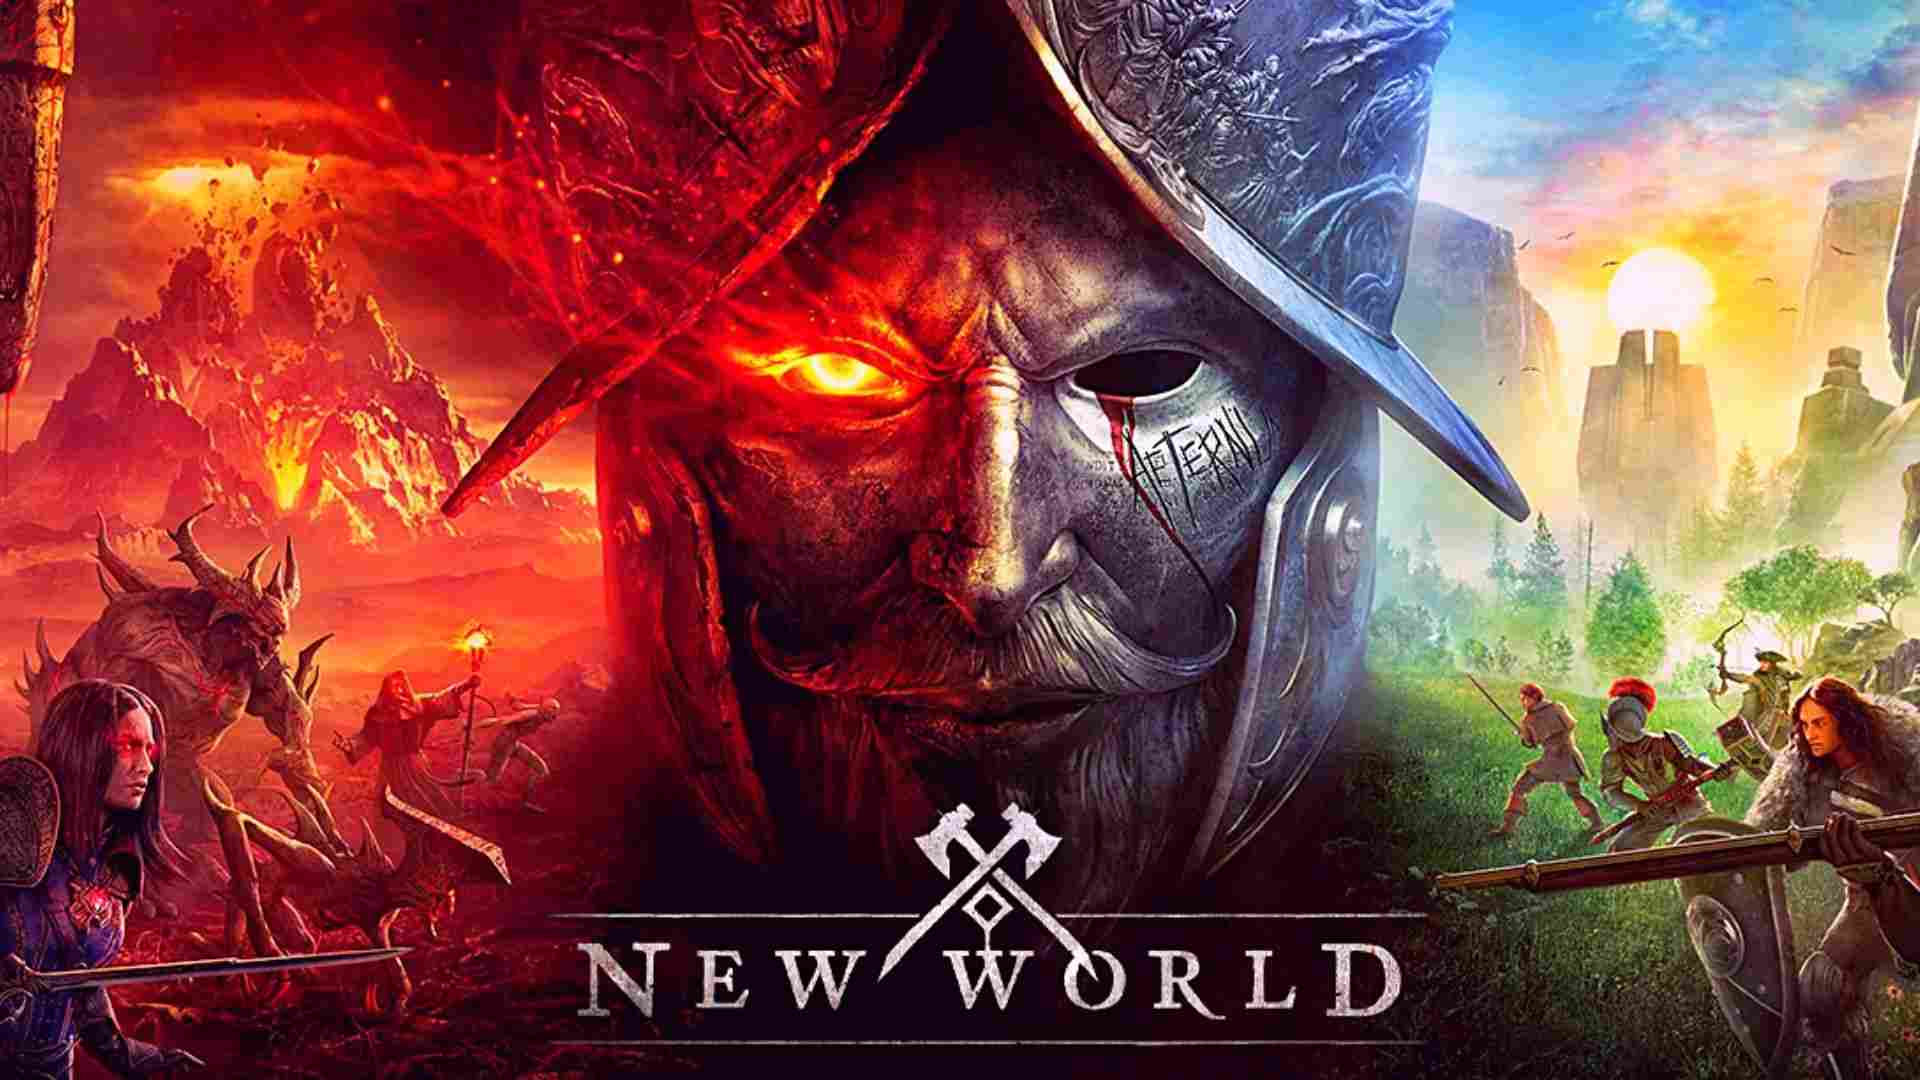 New World Age Rating, Parents Guide, Price, Gameplay, Review